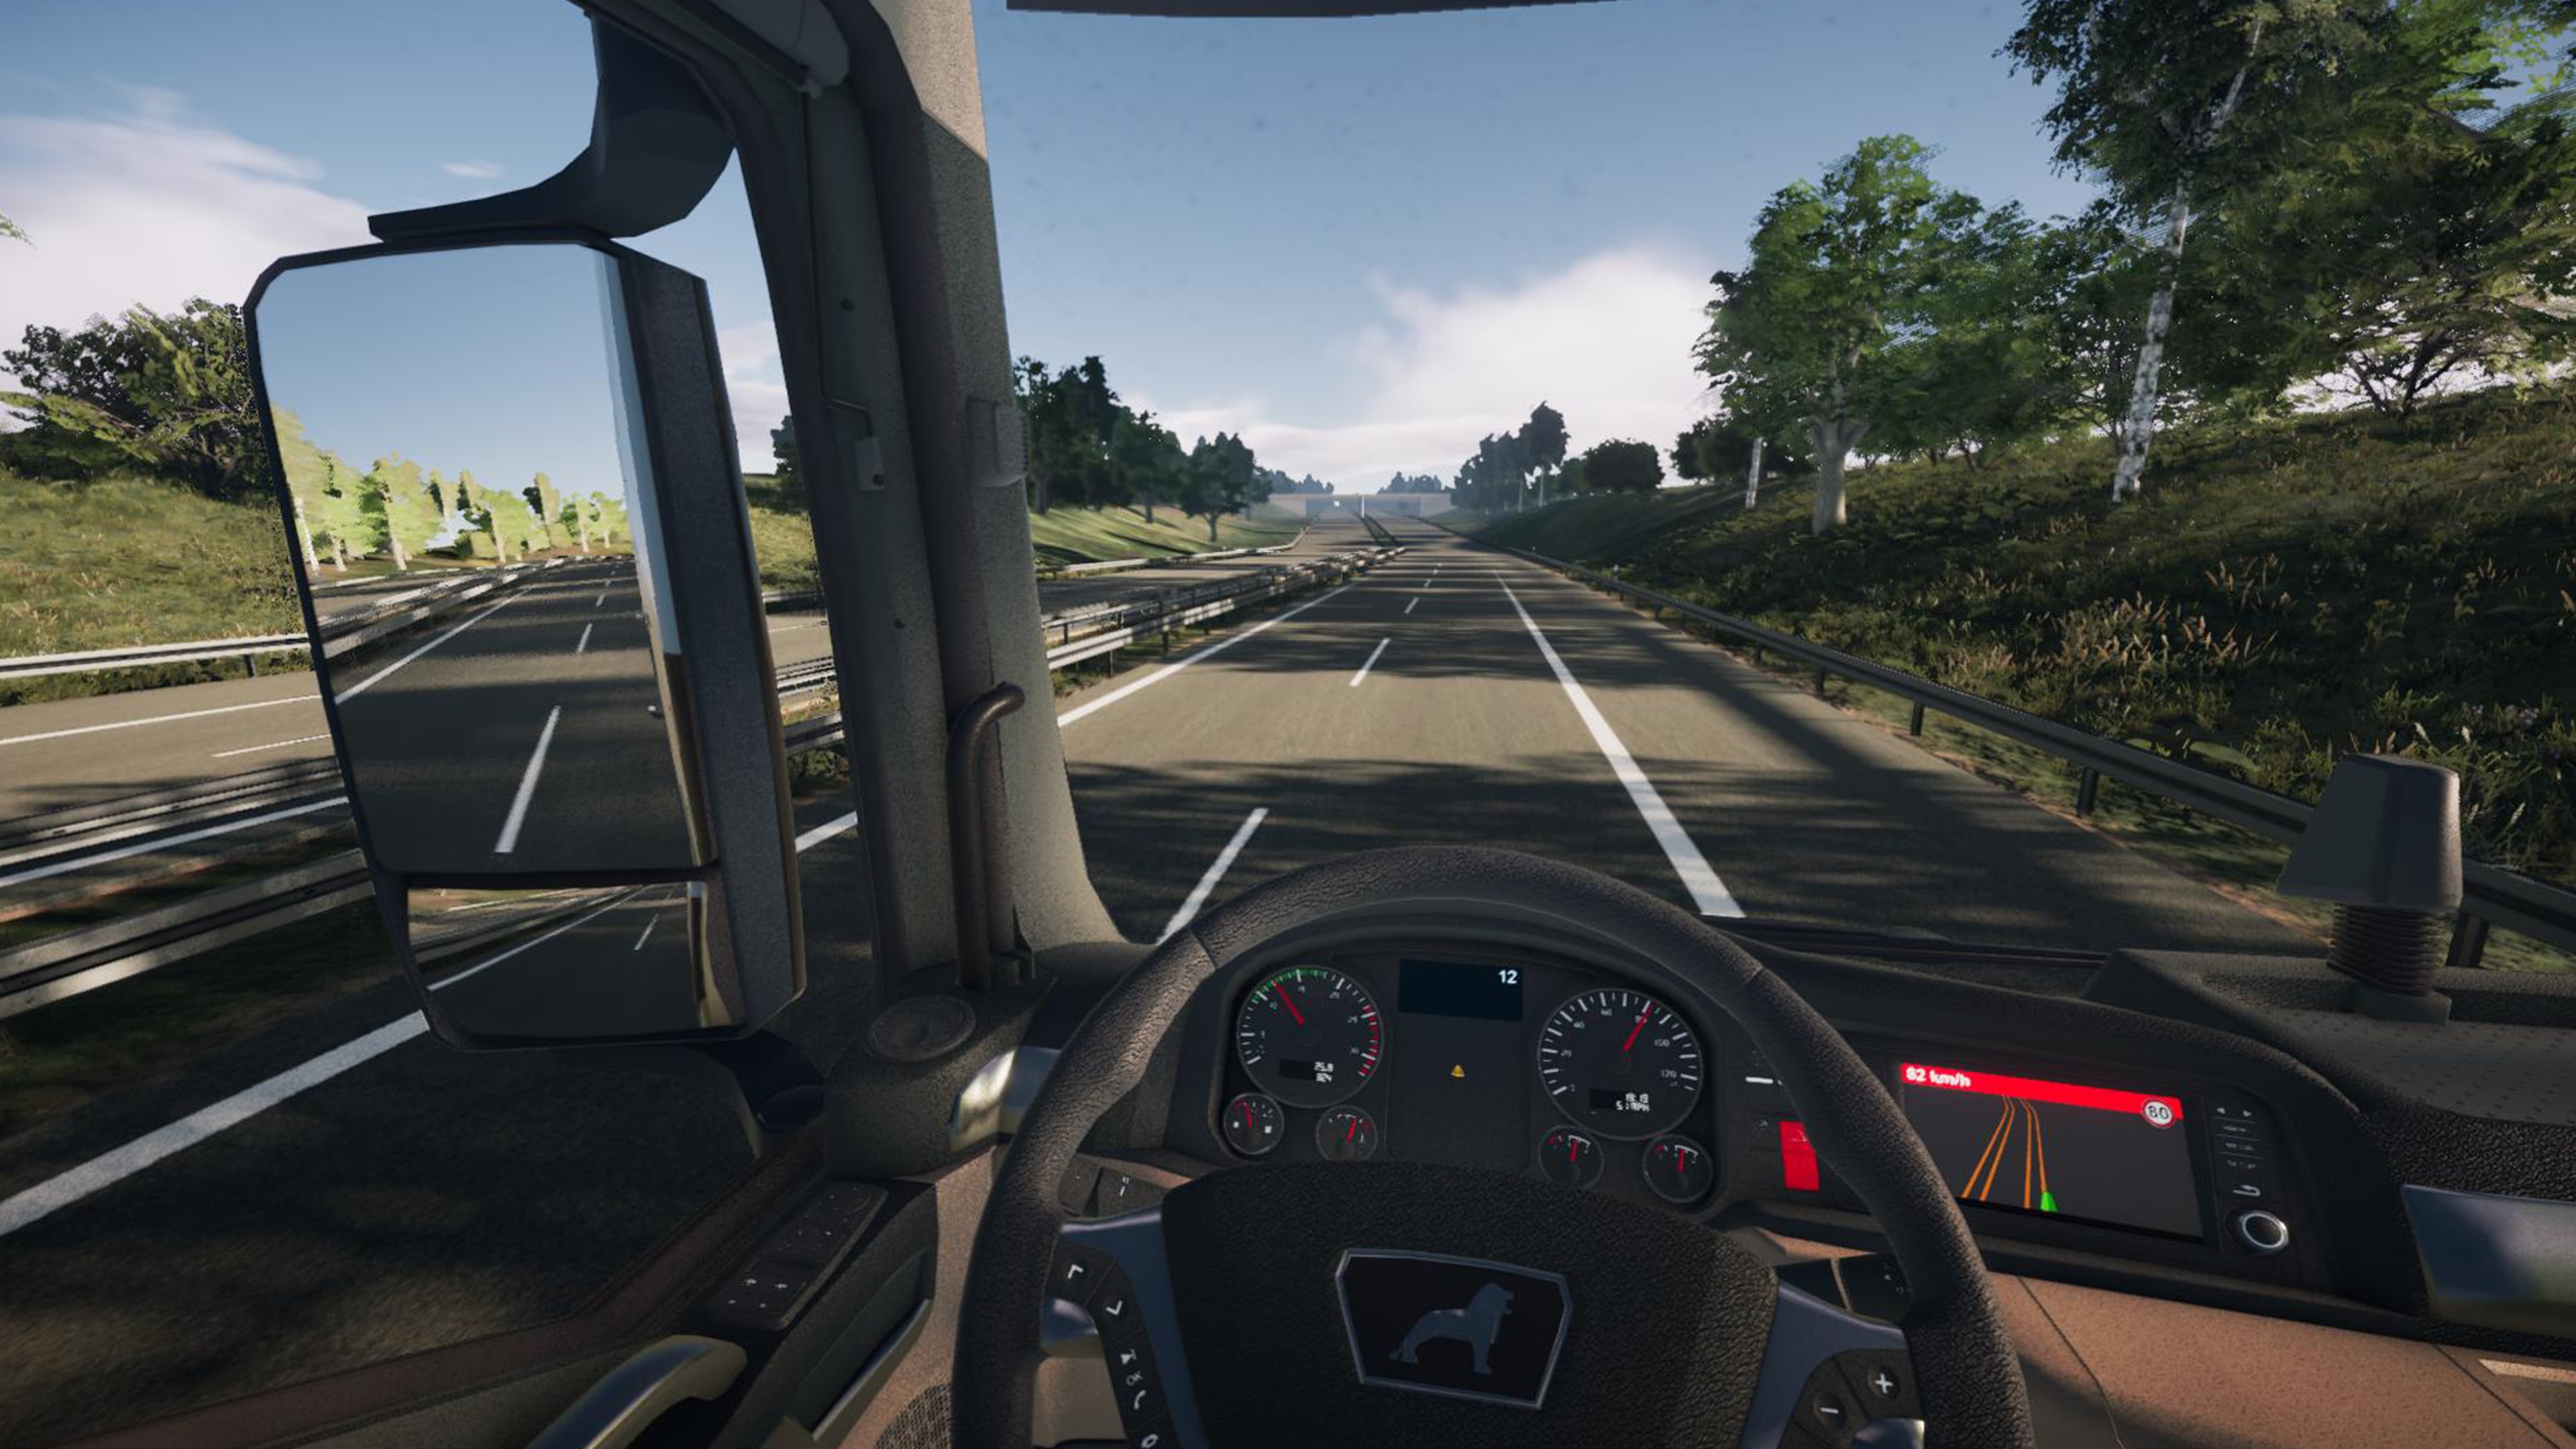 On the Road - Truck Simulator. Playstation 4